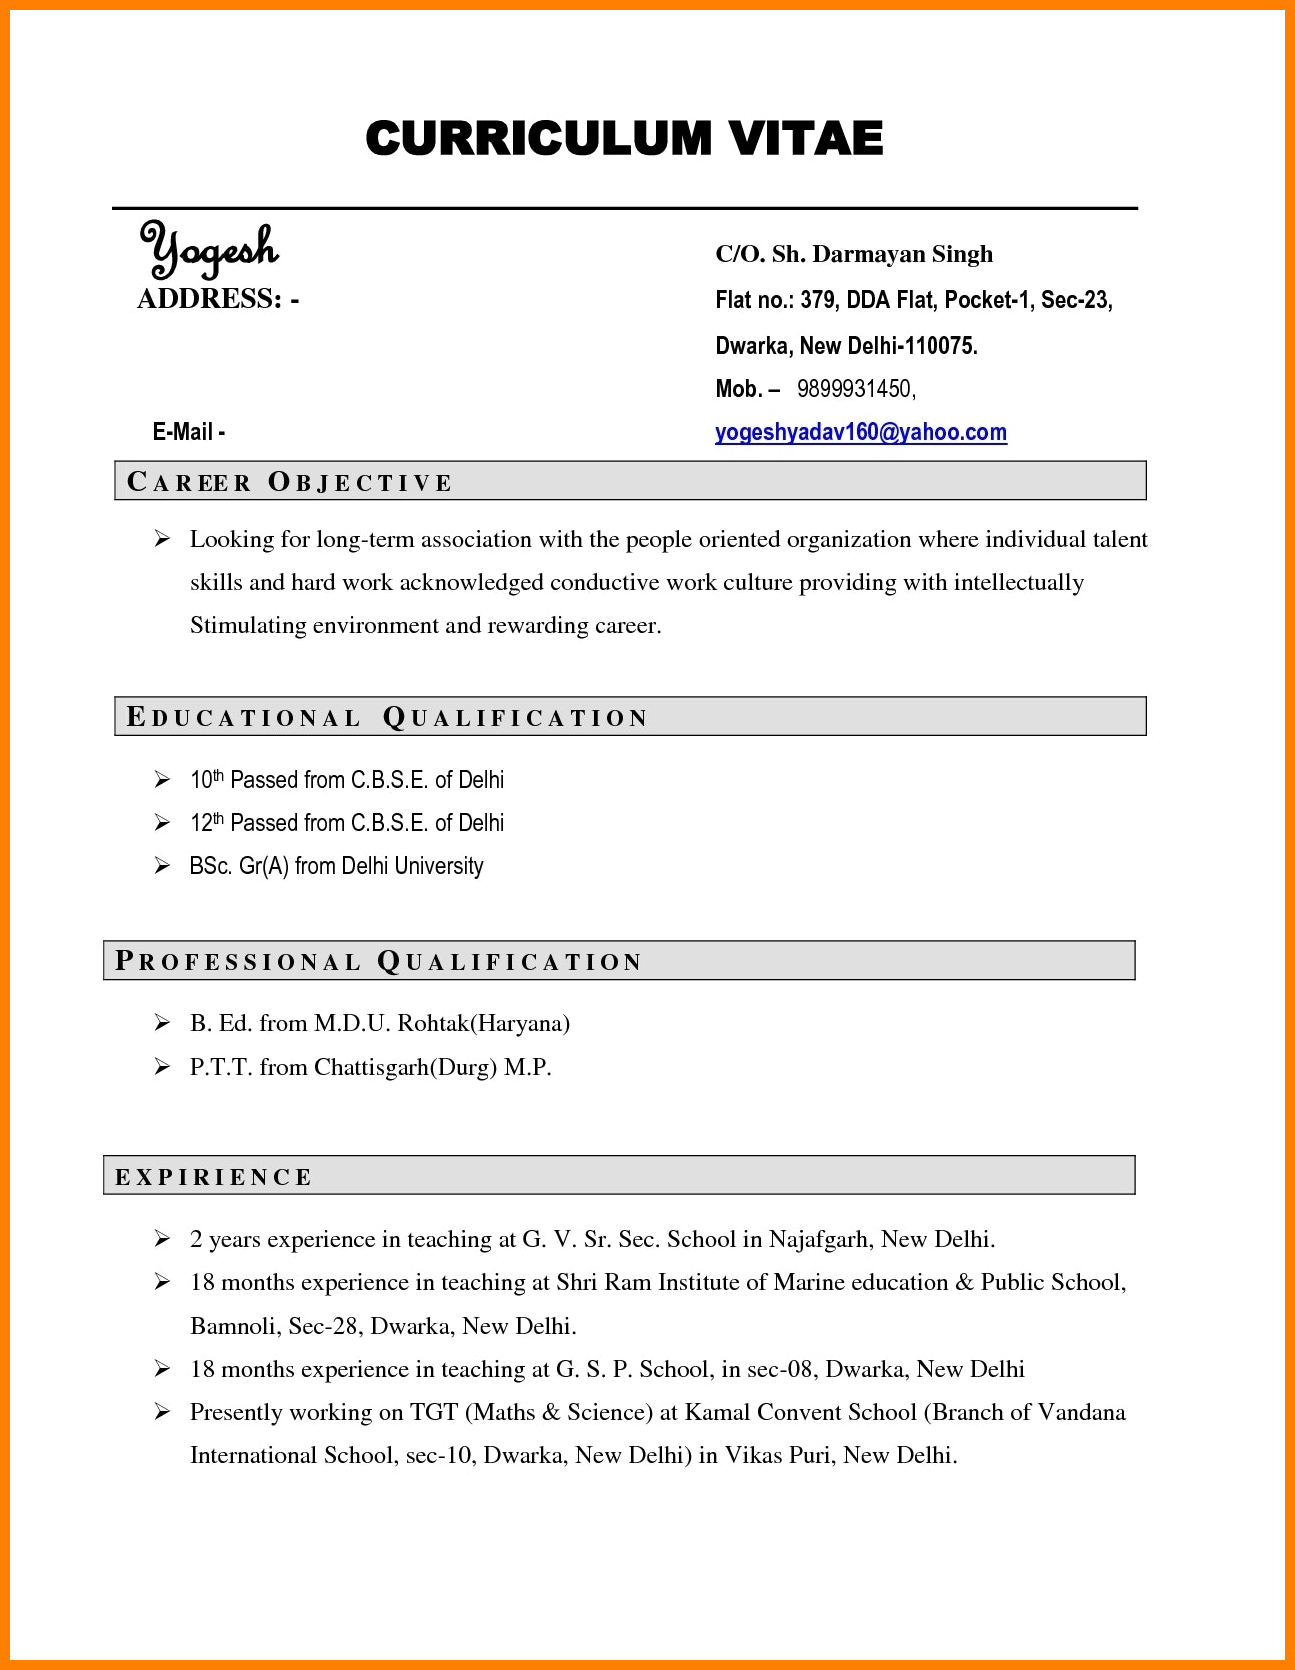 Example Of A Resume Cv Resume Example Examples Of Resumes Example Cv Sample Resume For Students Short Example Of Cv Resume example of a resume|wikiresume.com